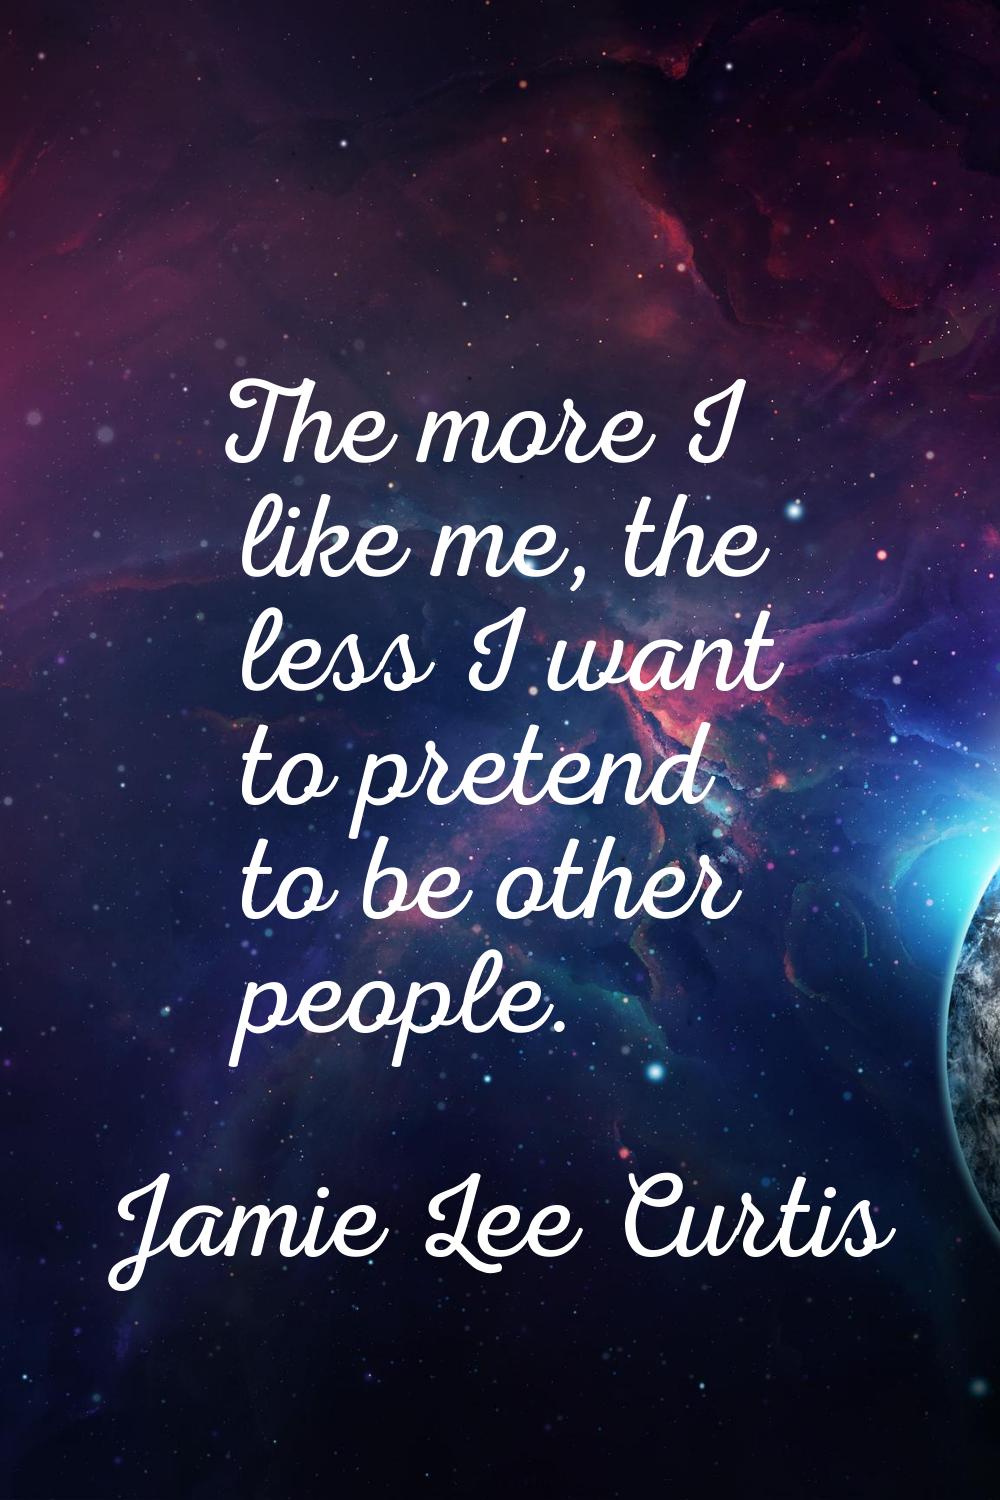 The more I like me, the less I want to pretend to be other people.